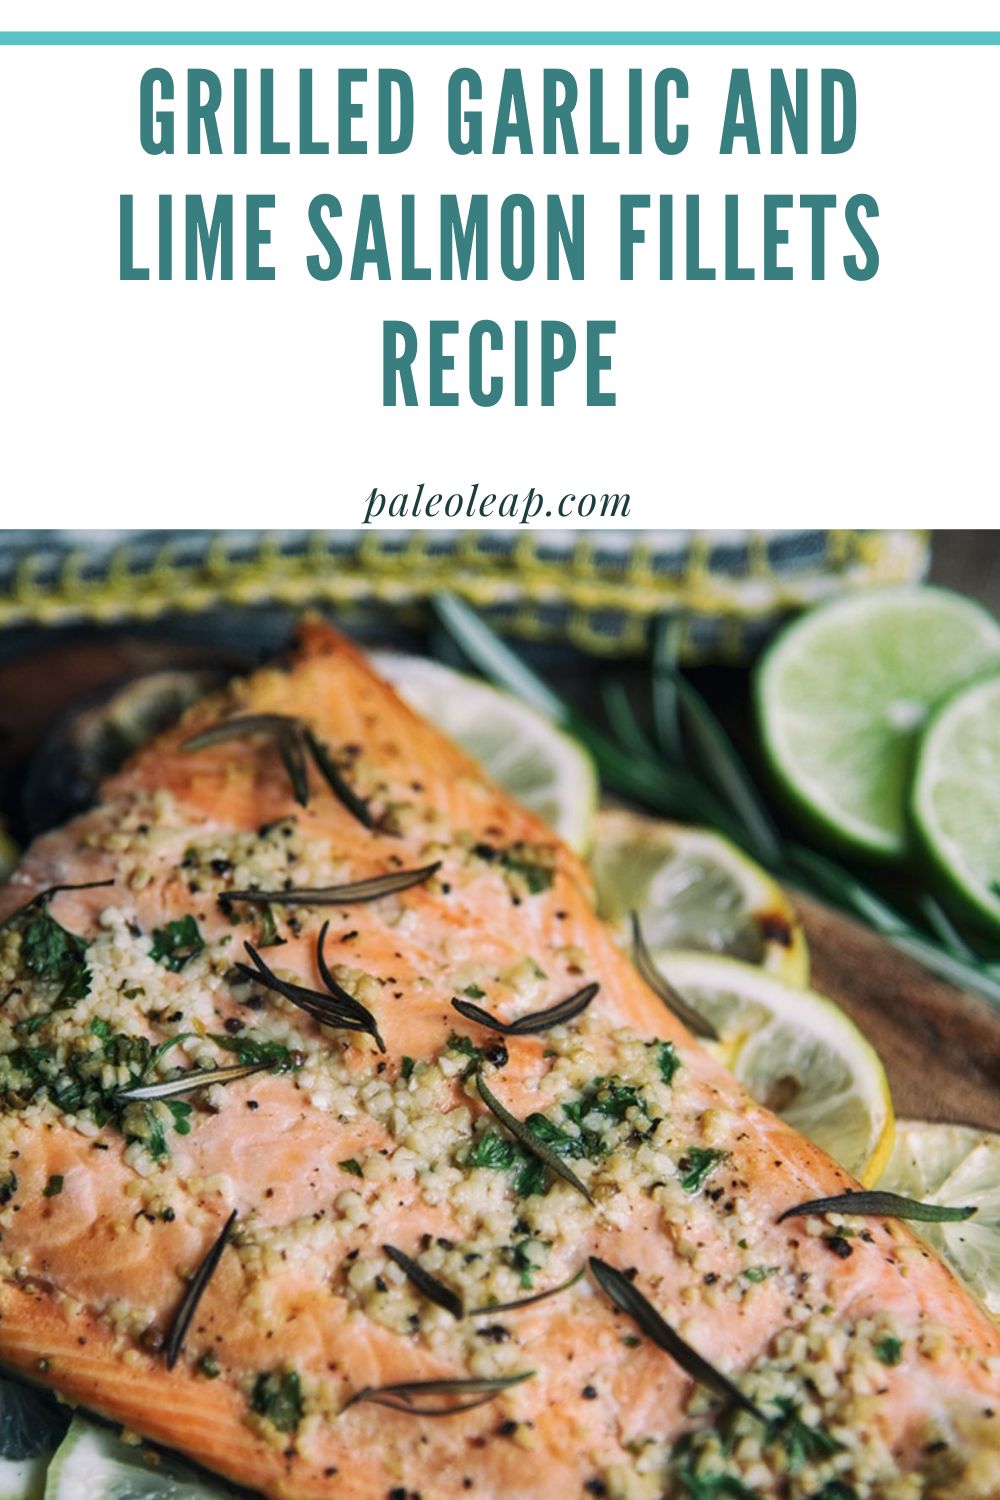 Grilled Garlic and Lime Salmon Fillets Recipe | Paleo Leap